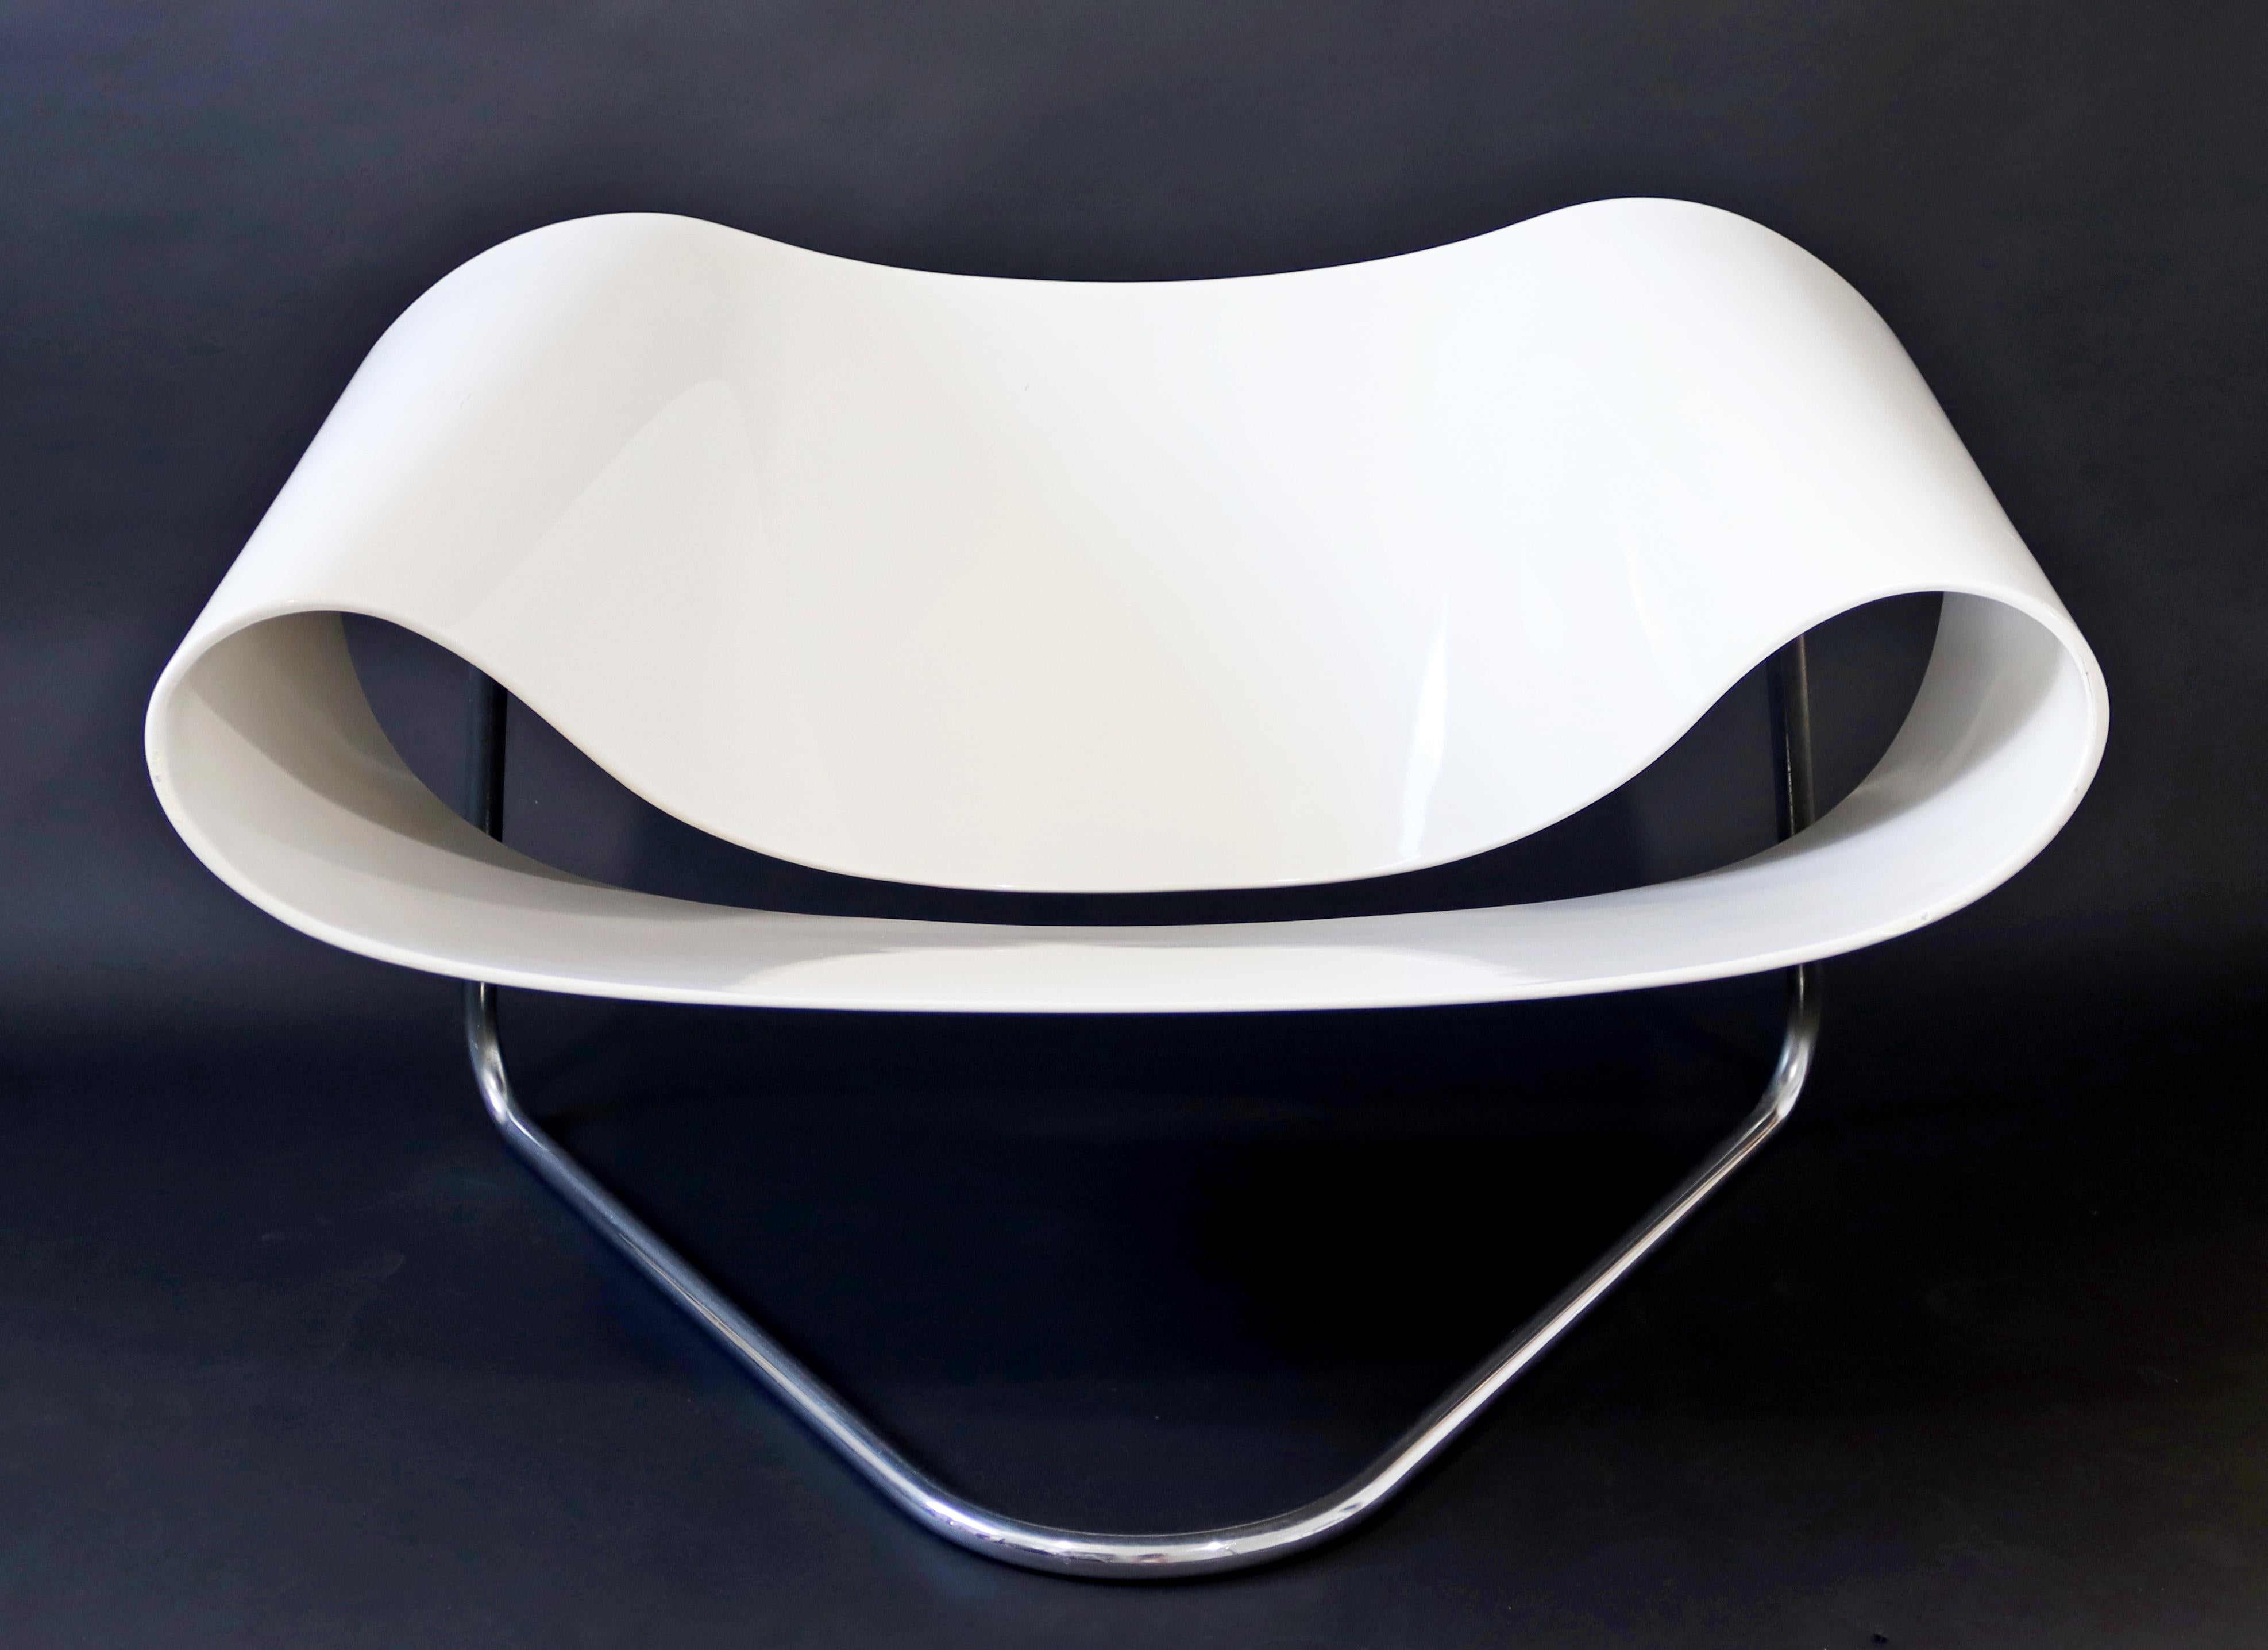 For your consideration is an outstanding, original CL9 Ribbon lounge chair, with a fiberglass seat, by Franca Stagi for Bernini, made in Italy, circa 1961. In very good vintage condition. The dimensions are 36